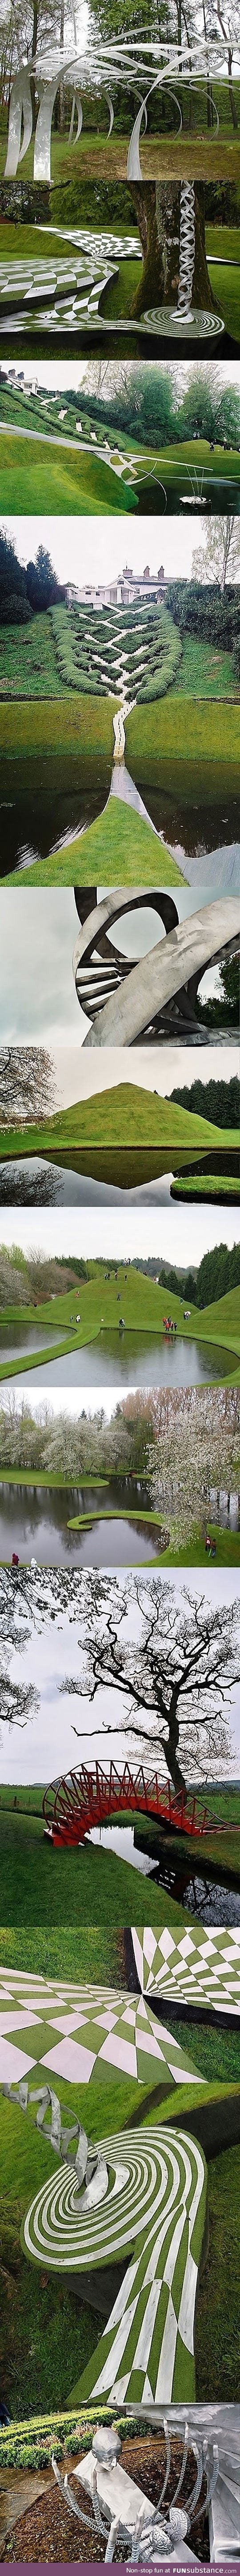 This is the garden of cosmic speculation in scotland